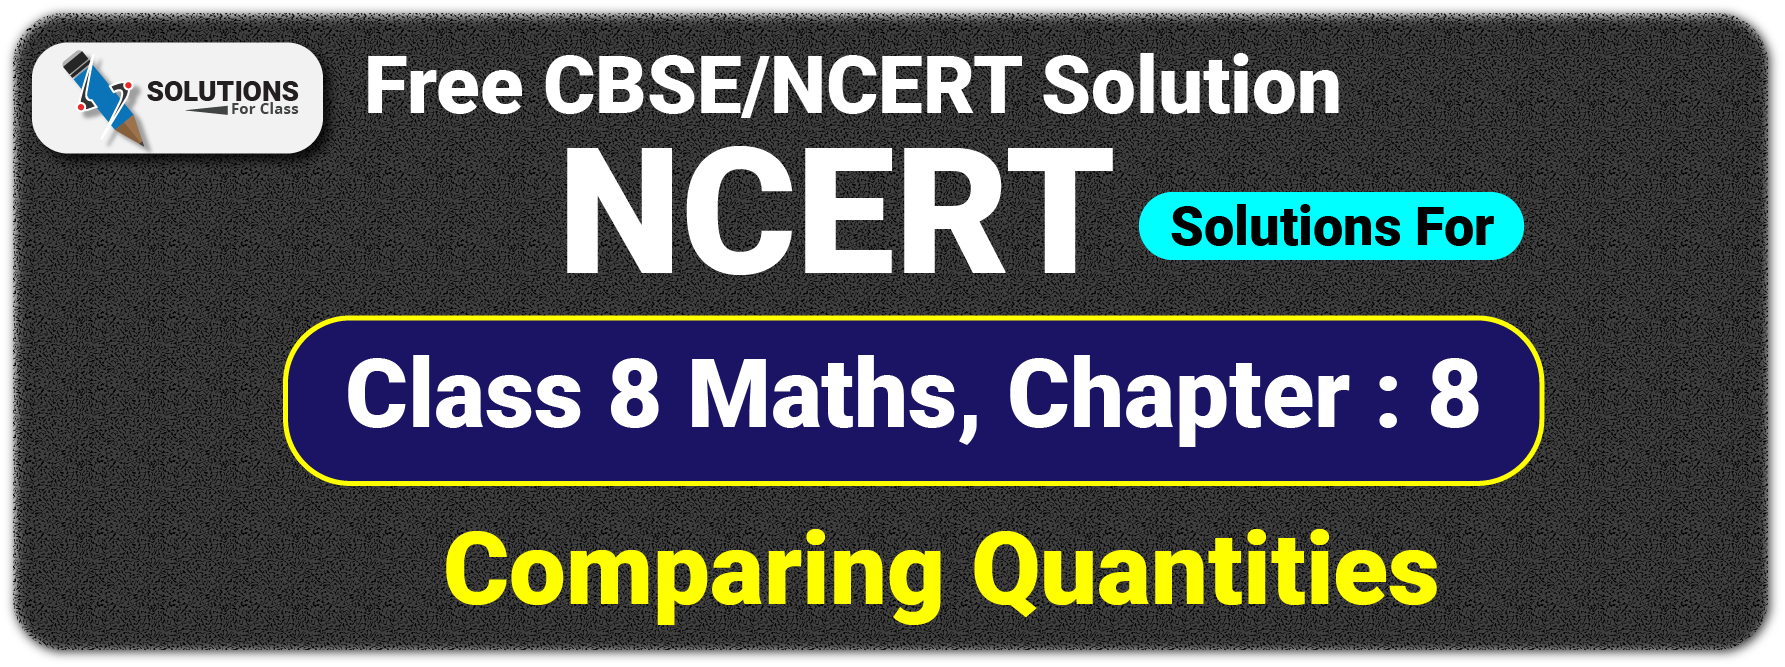 NCERT Solutions For Class 8 Chapter 8, Comparing Quantities